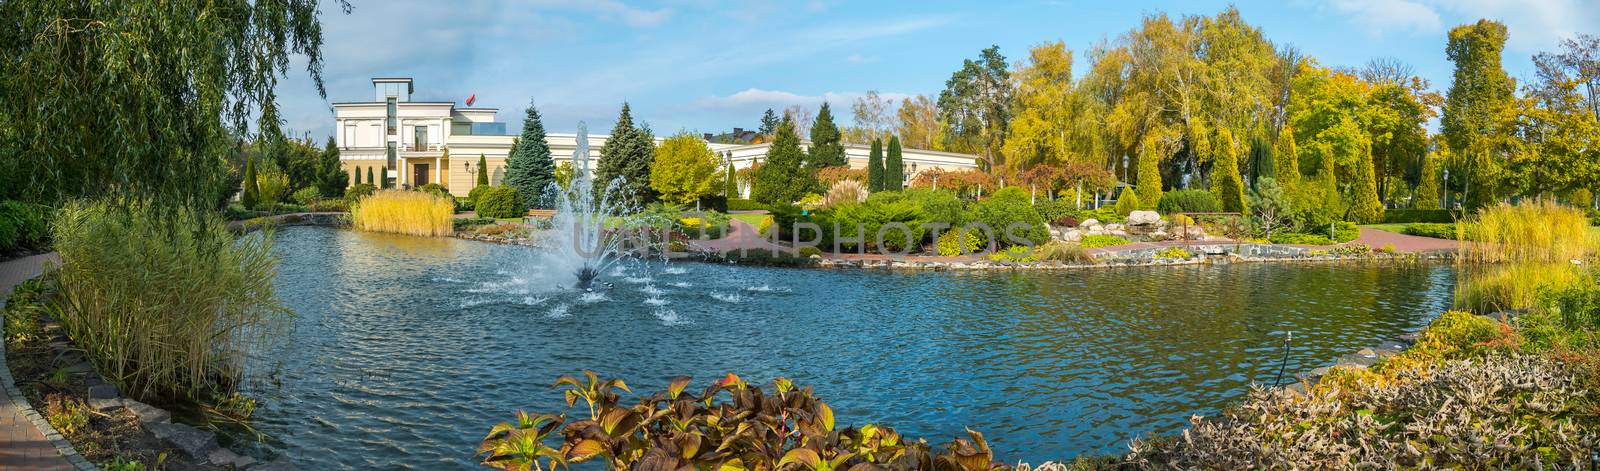 A chic panorama of the park in the summer. With a pond and beating in it a fountain of luxurious green bushes of flowers and trees and a building with a flag fluttering on the roof. by Adamchuk